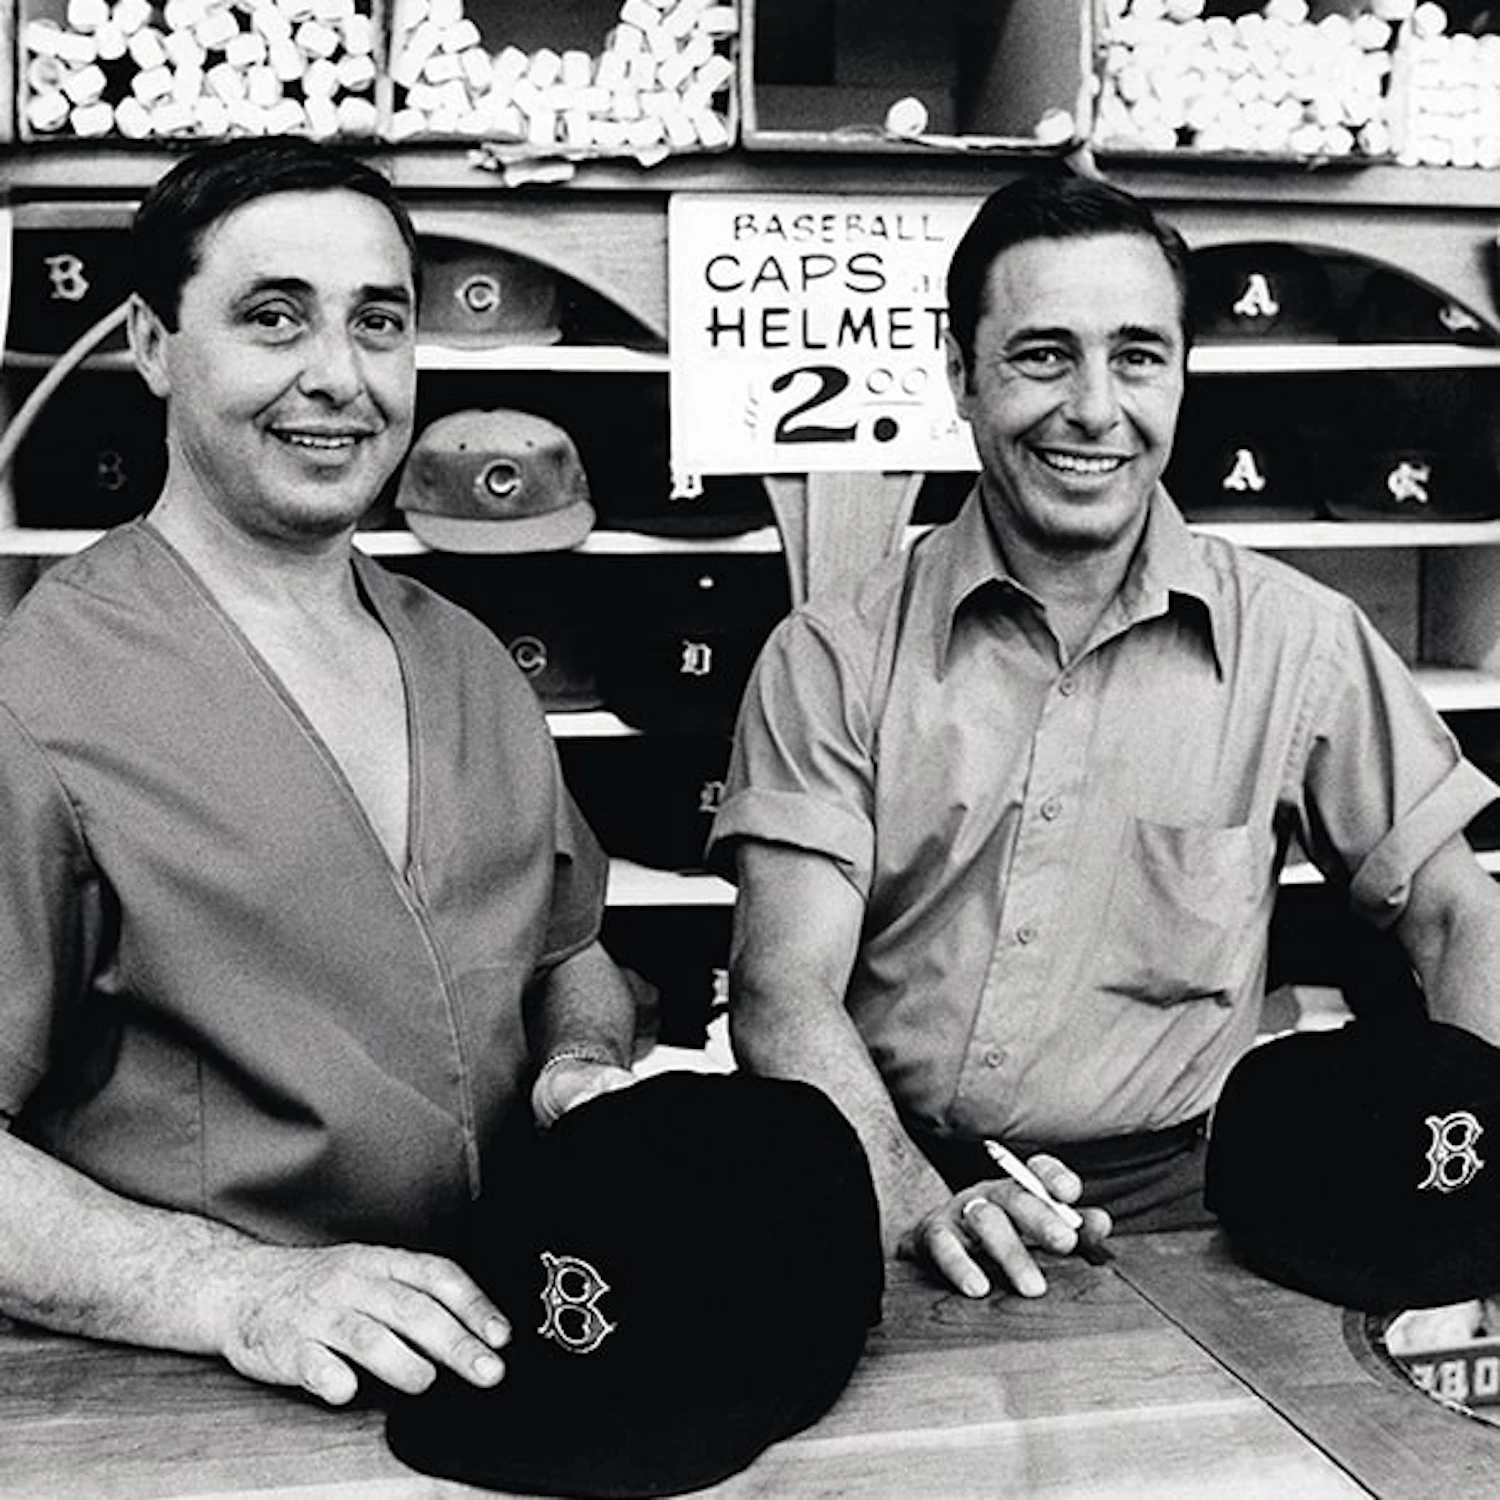 Why is the Cap Brand '47, which has Grown from Wagon Sales to Officially  Licensed by MLB, so Popular?